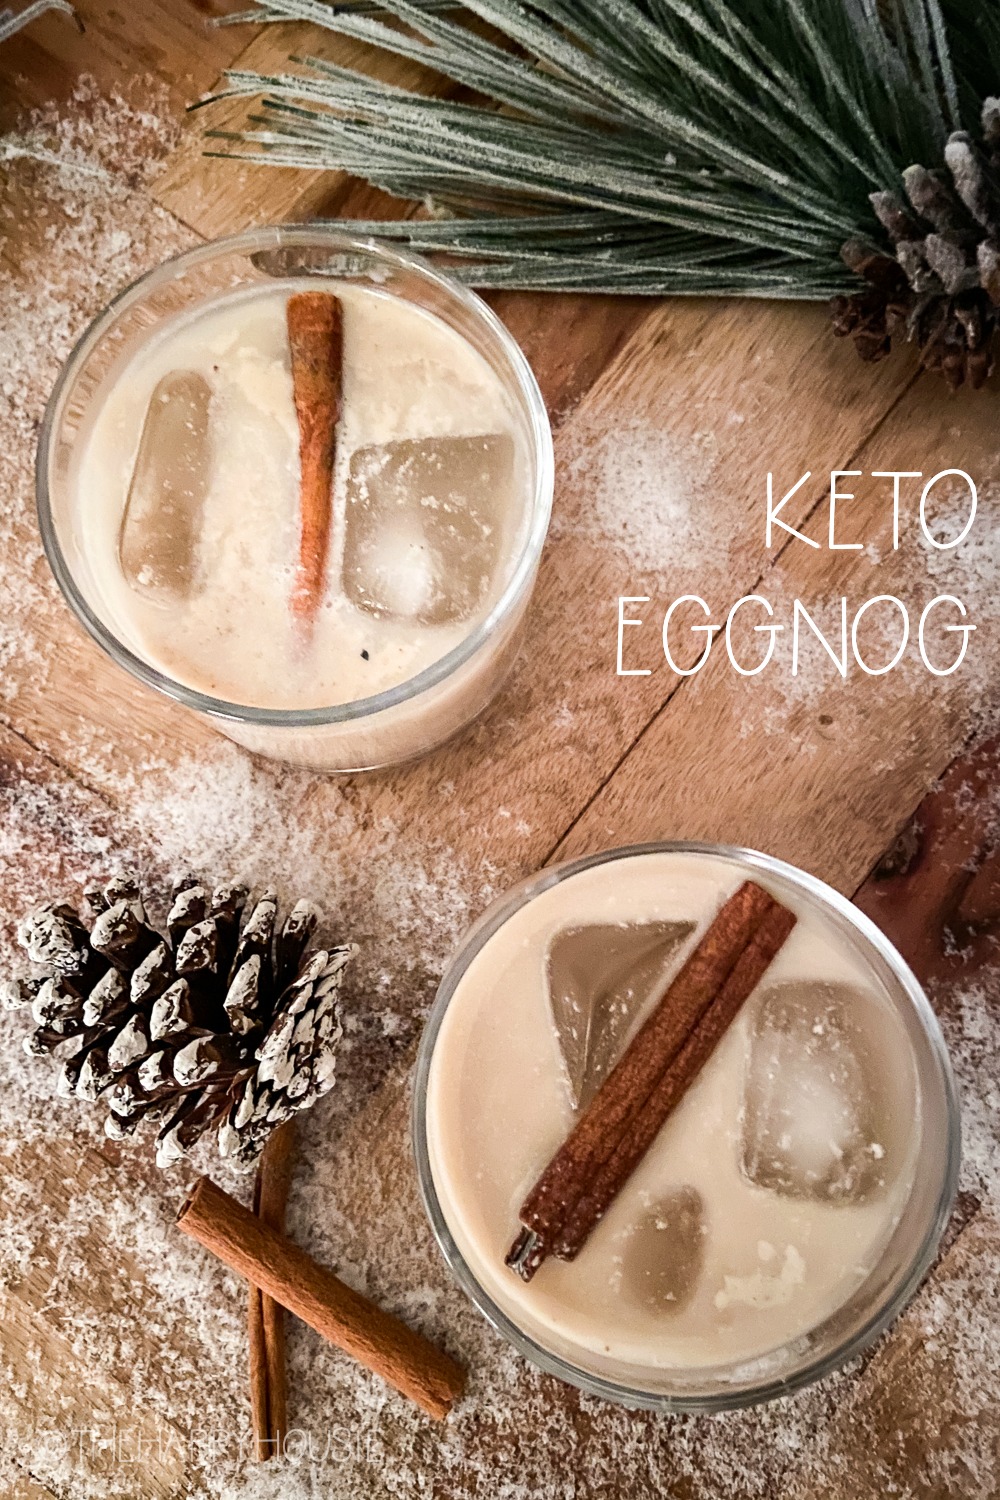 The eggnog on the snowy table beside a pinecone an evergreen with sticks of cinnamon.